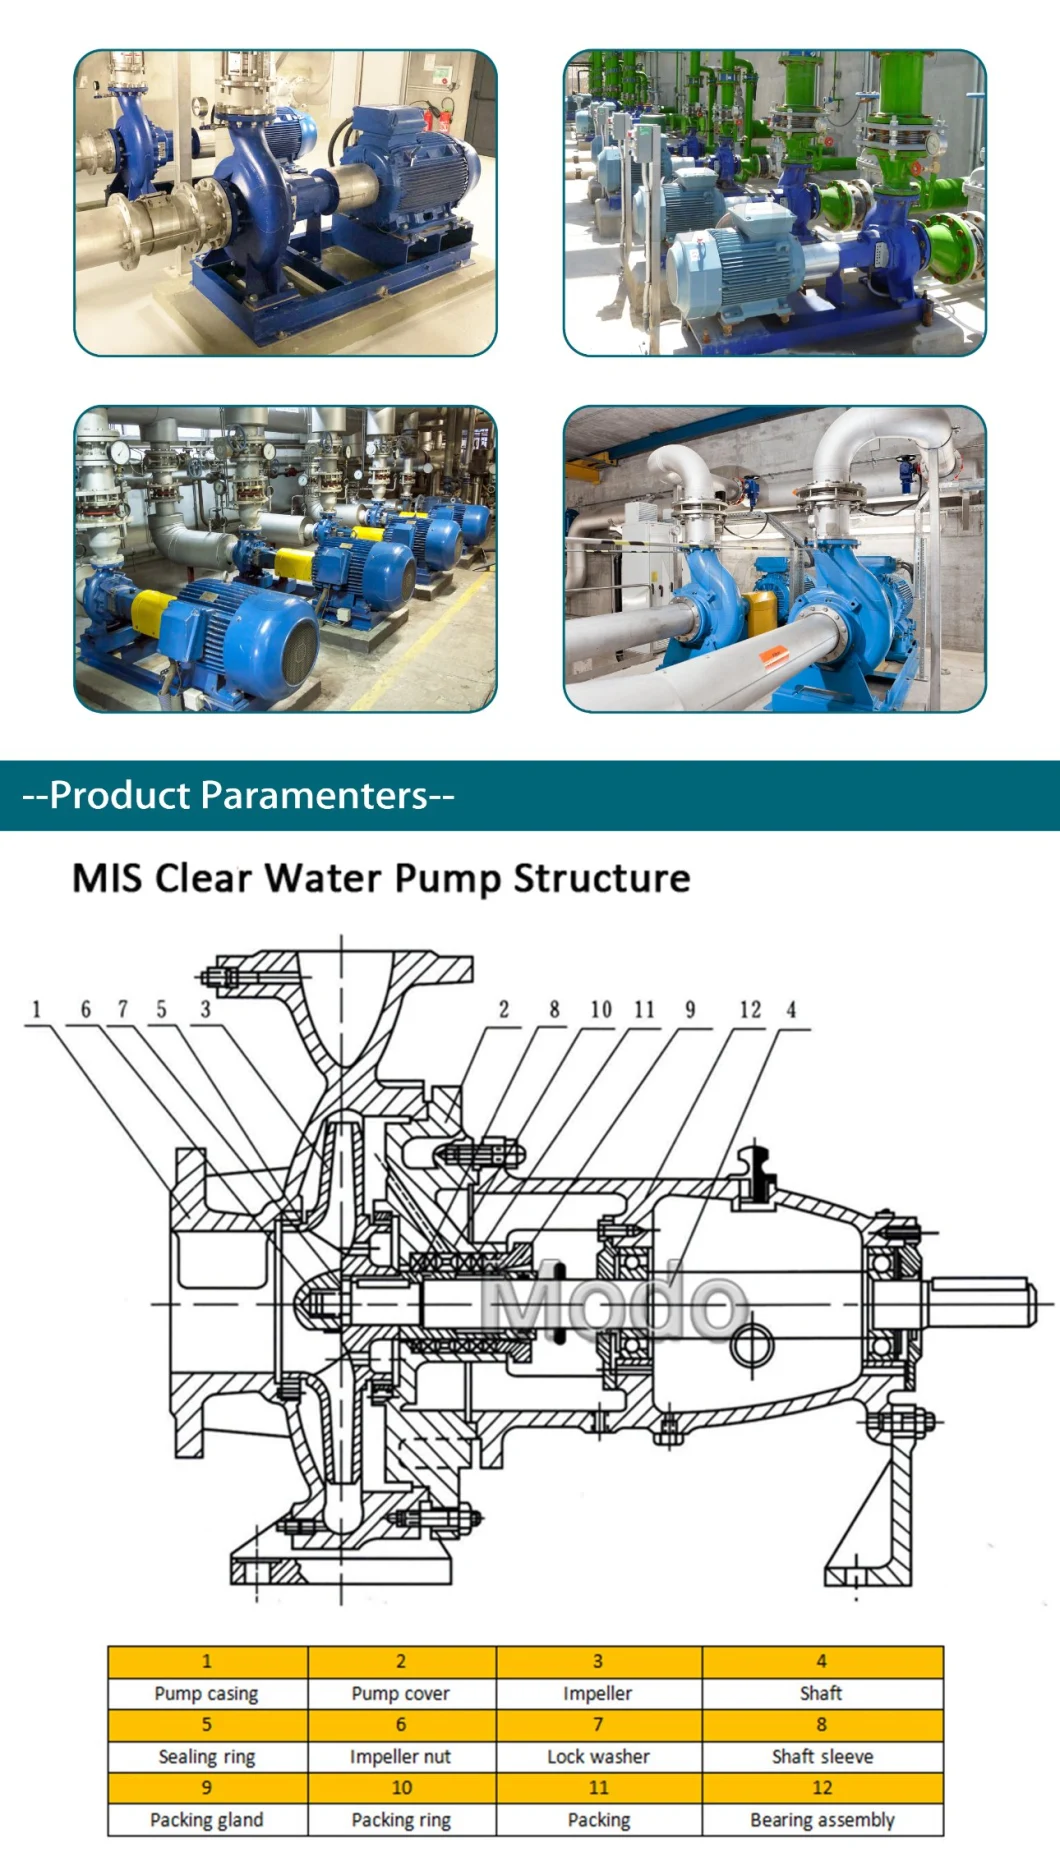 Newest Wear Resistant High Pressure Horizontal Emergency Electric Drive Fire Water Supply Pump for Fire Fighting